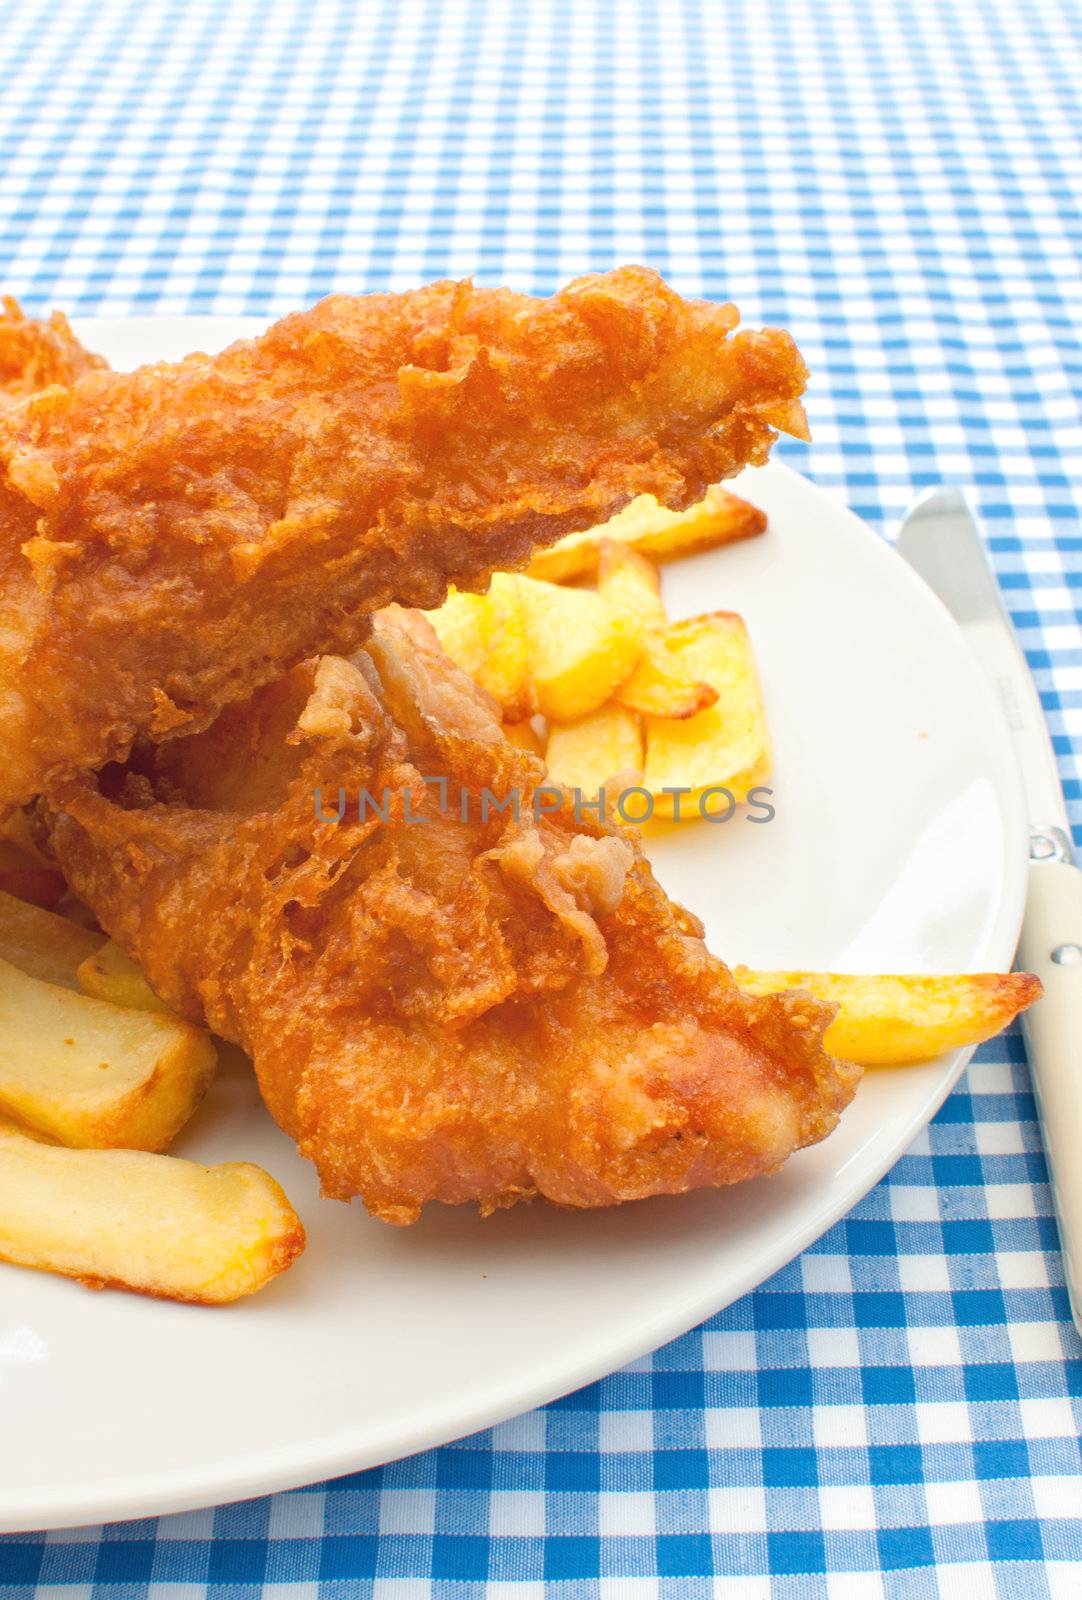 Traditional english fish and chips takeaway meal